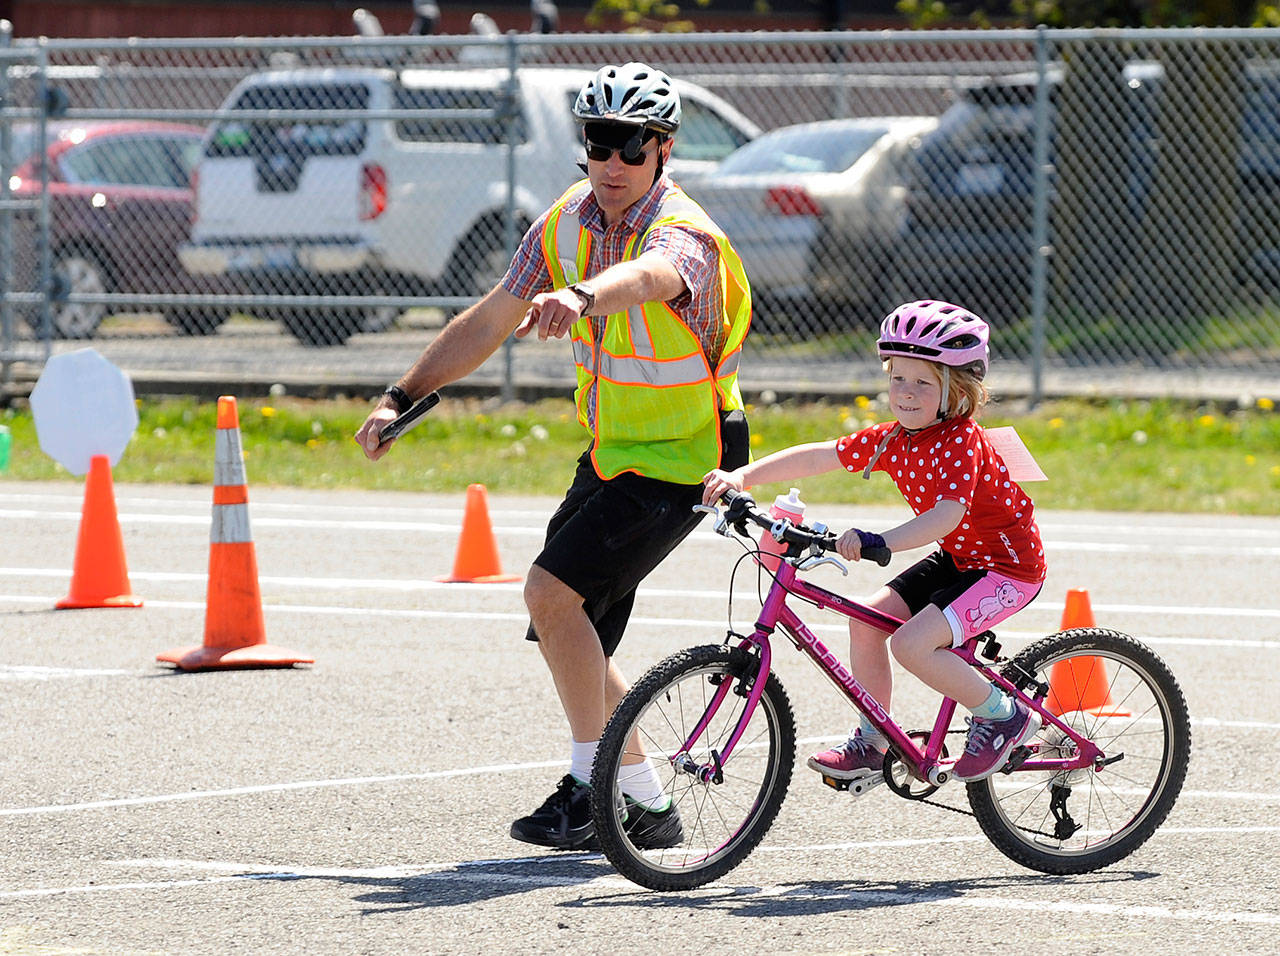 OPBA’s second Bicycle Rodeo offers safety, riding skills and fun